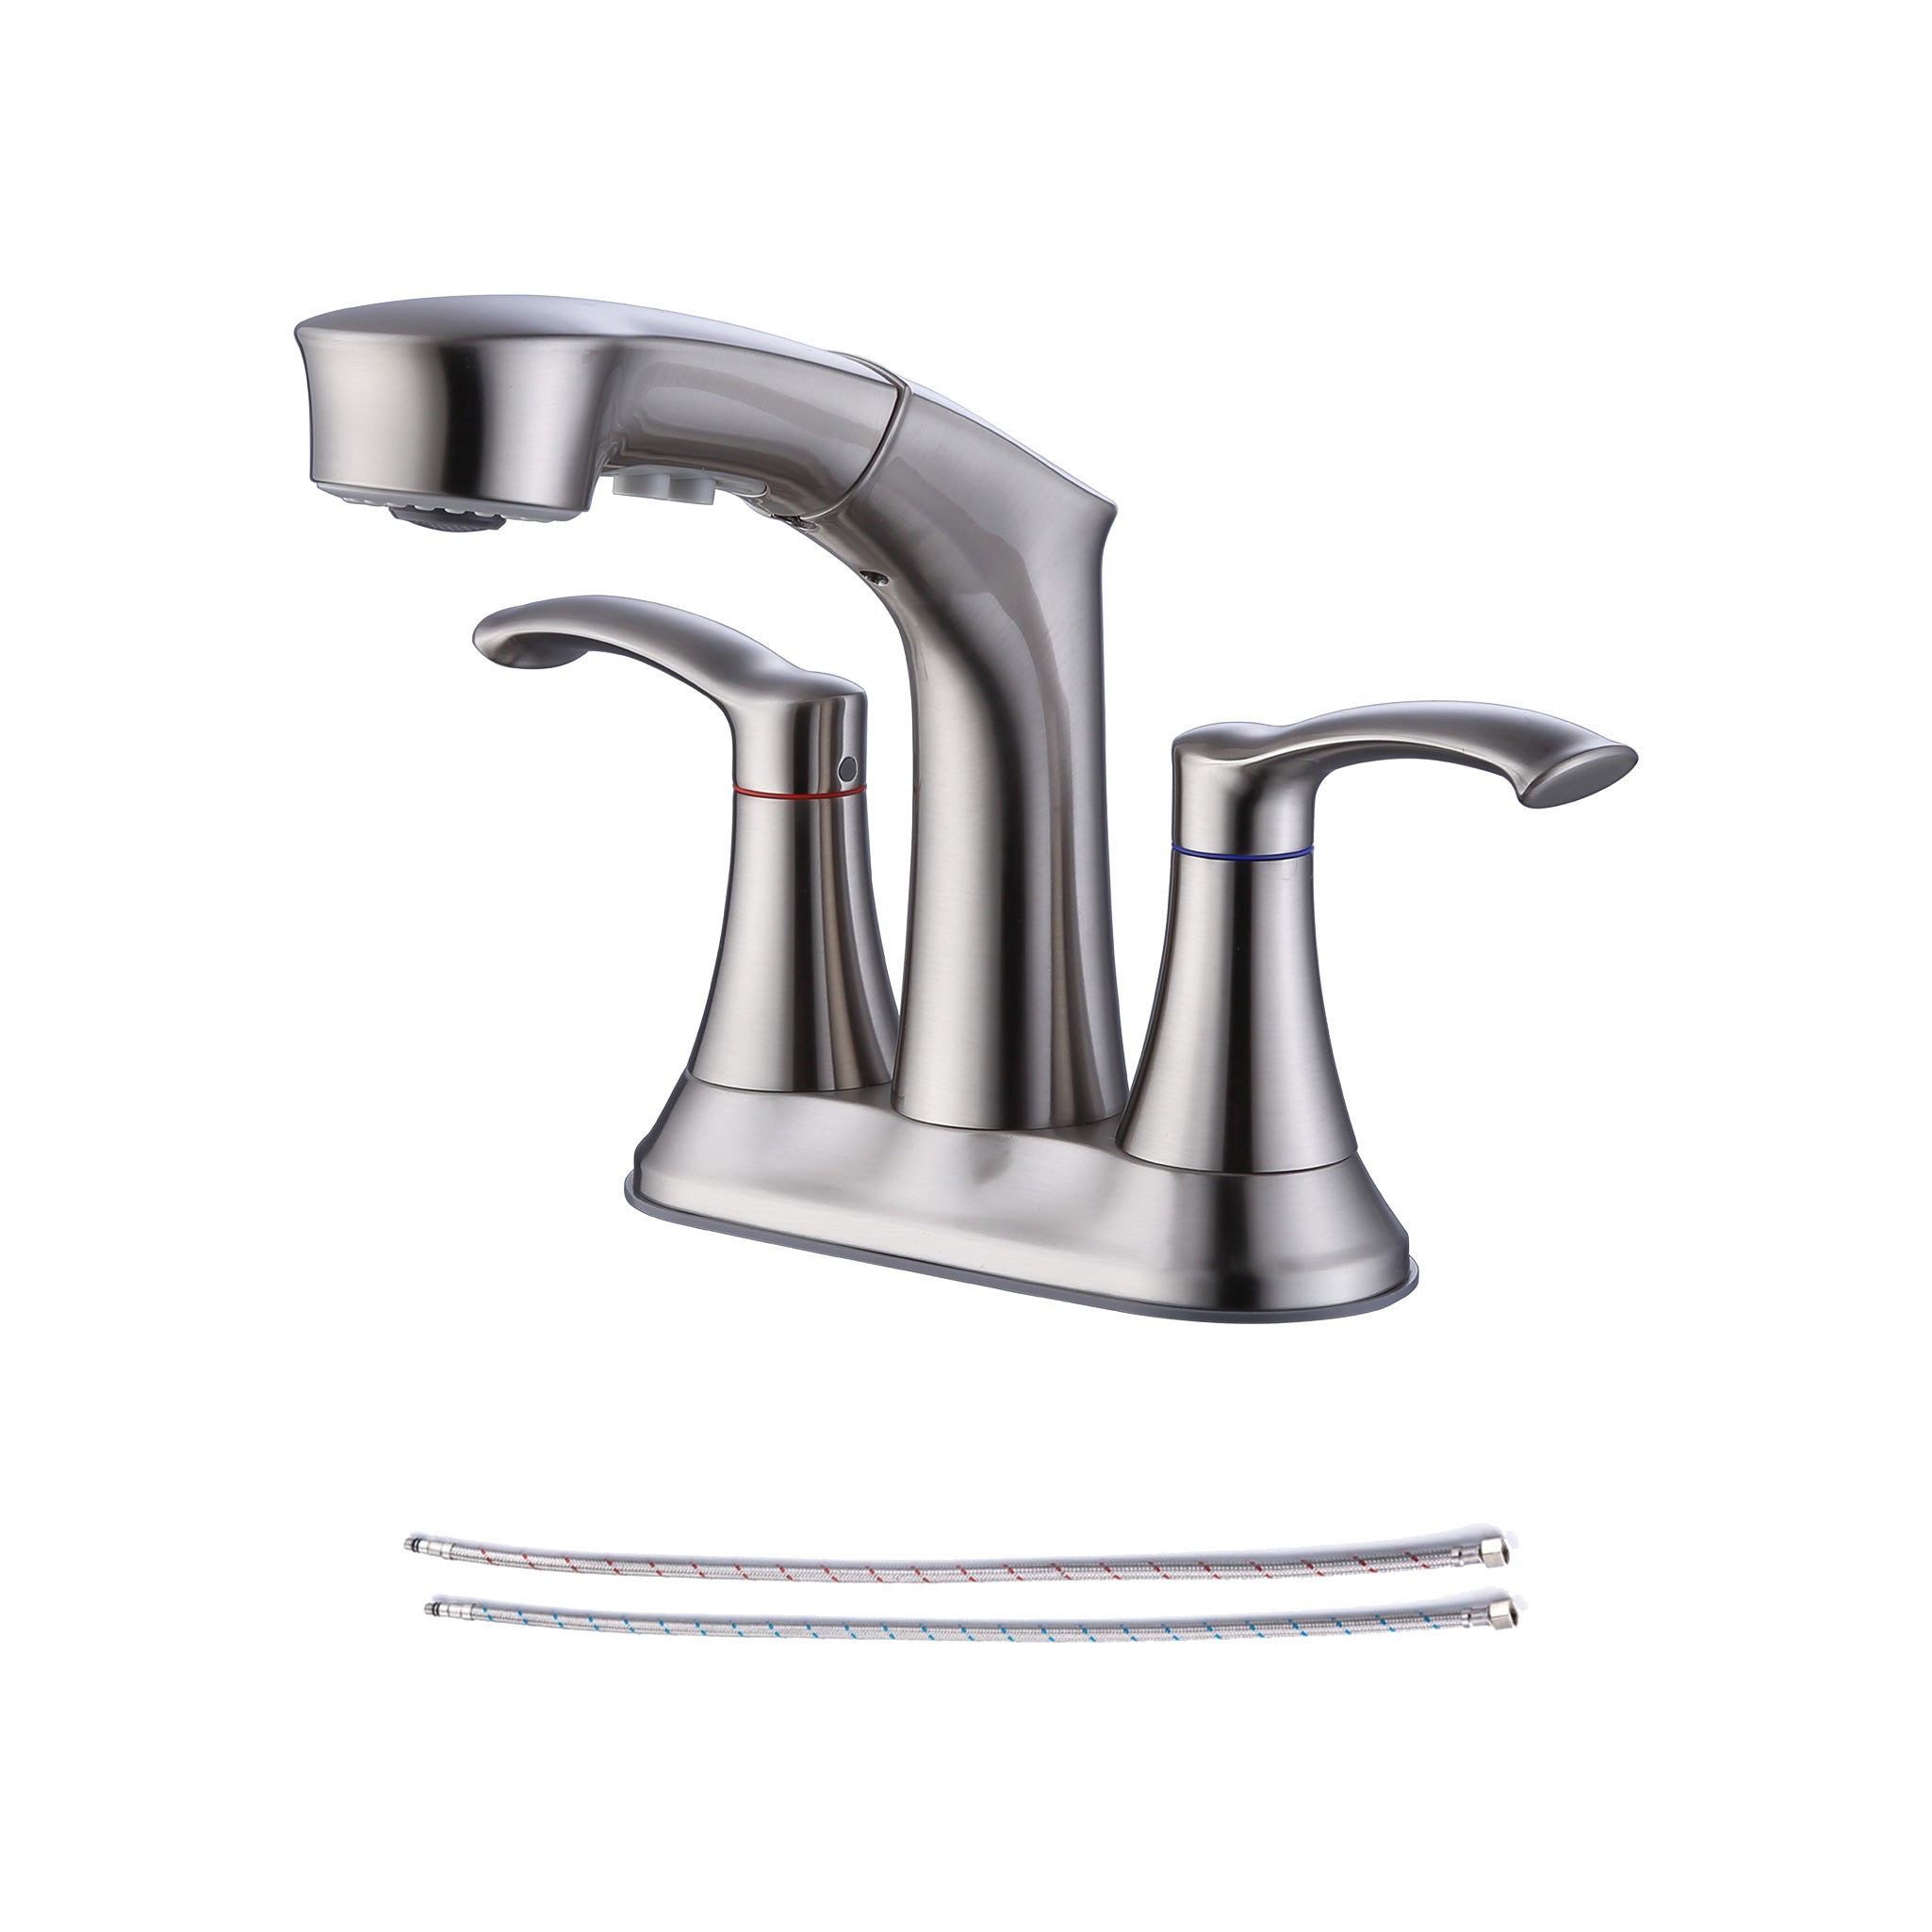 Centerset 2-Handle Pull-Out Bathroom Faucet RX5501